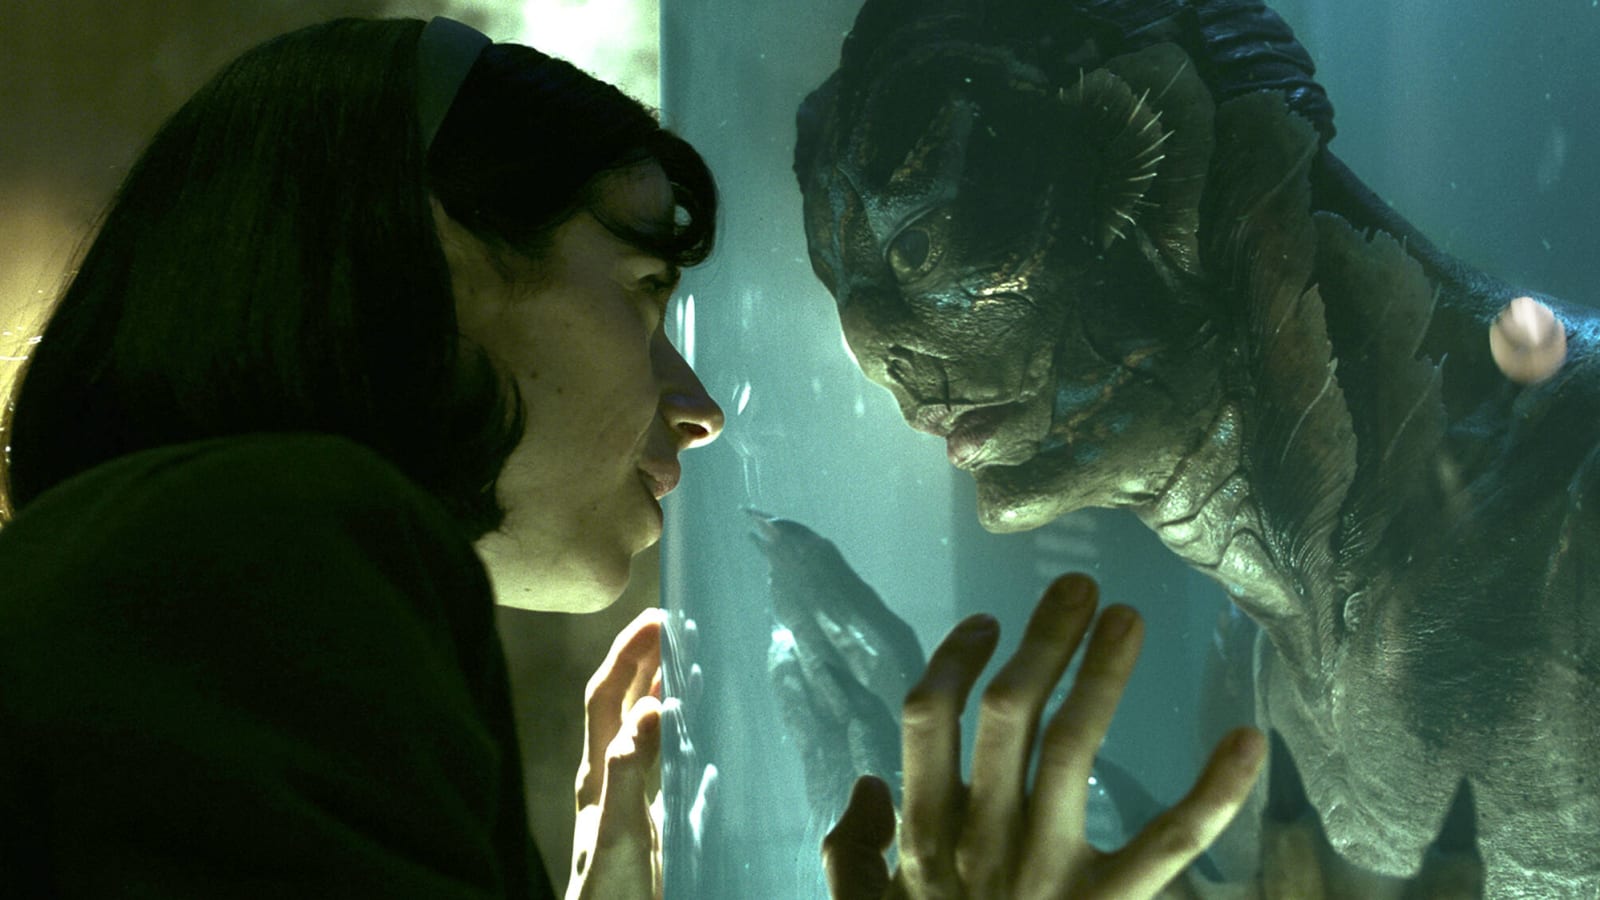 20 facts you might not know about 'The Shape of Water'